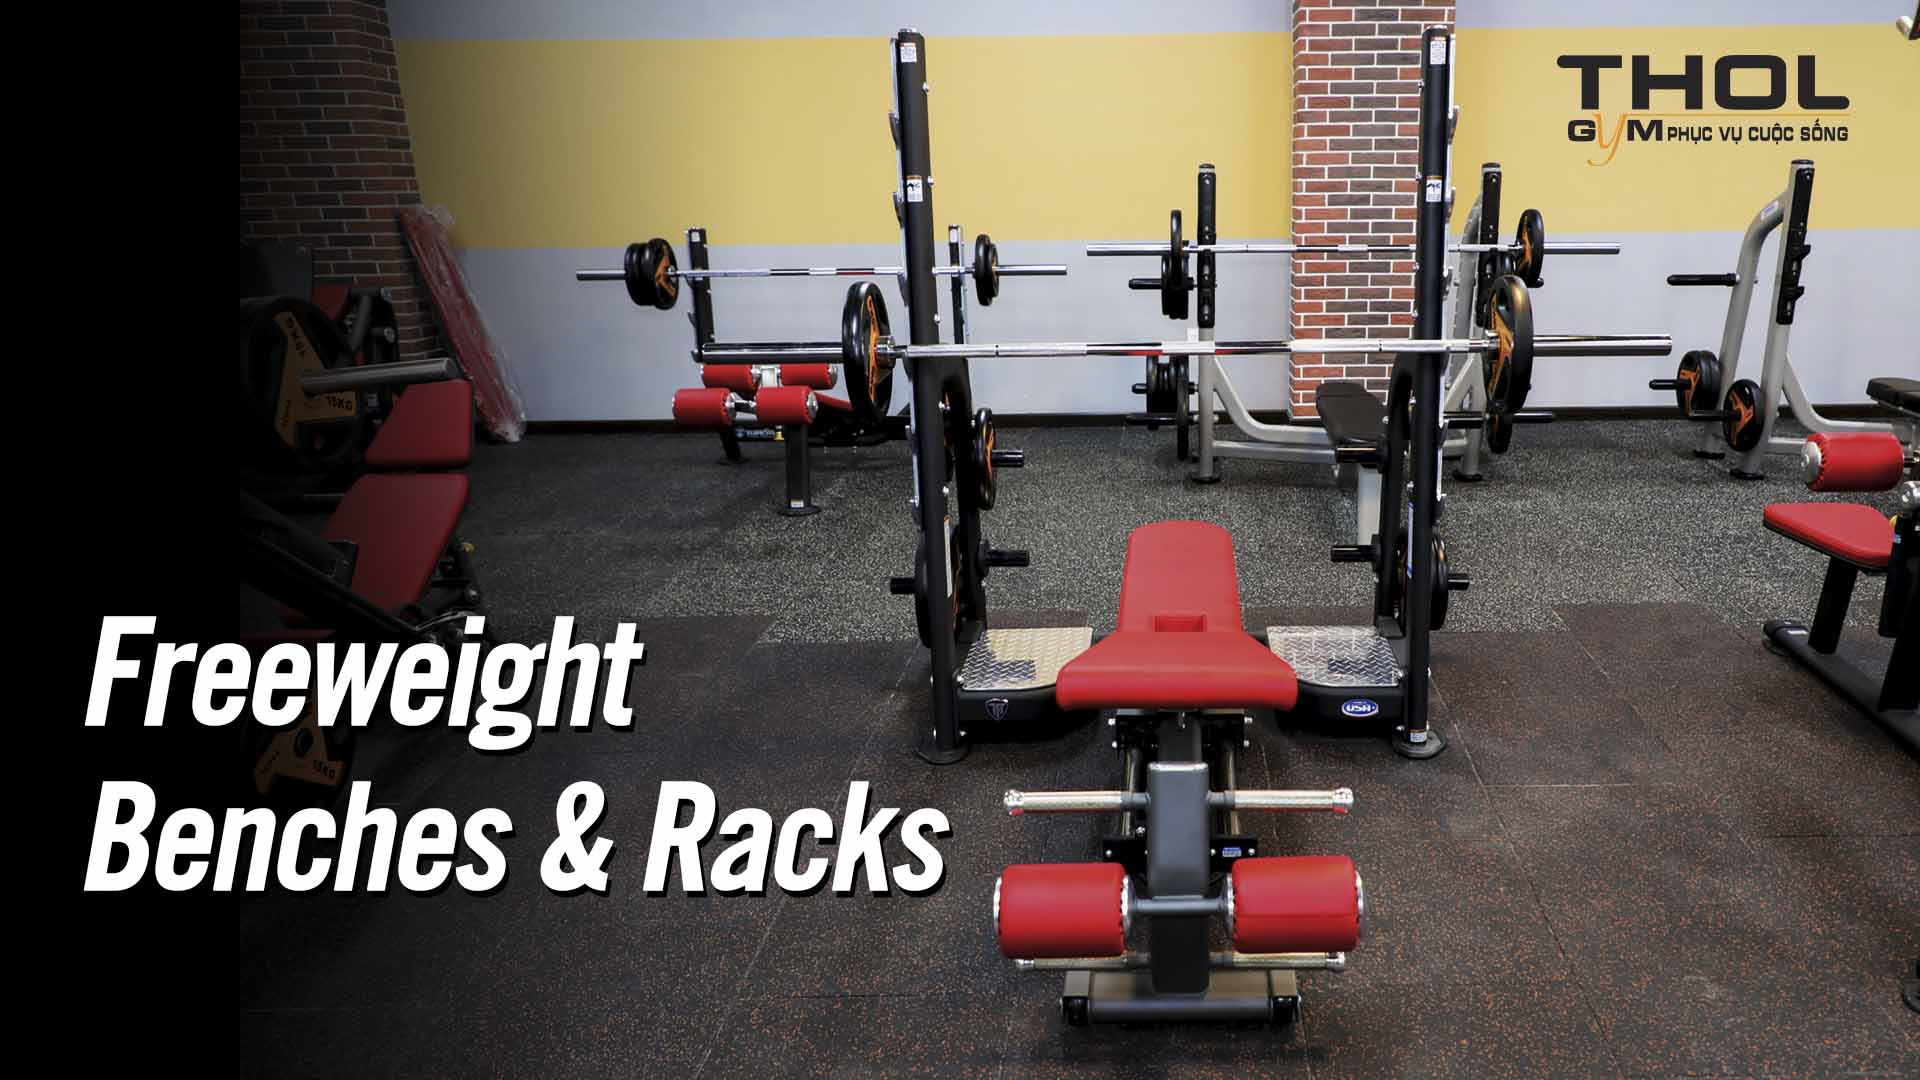 Freeweight Benches & Racks